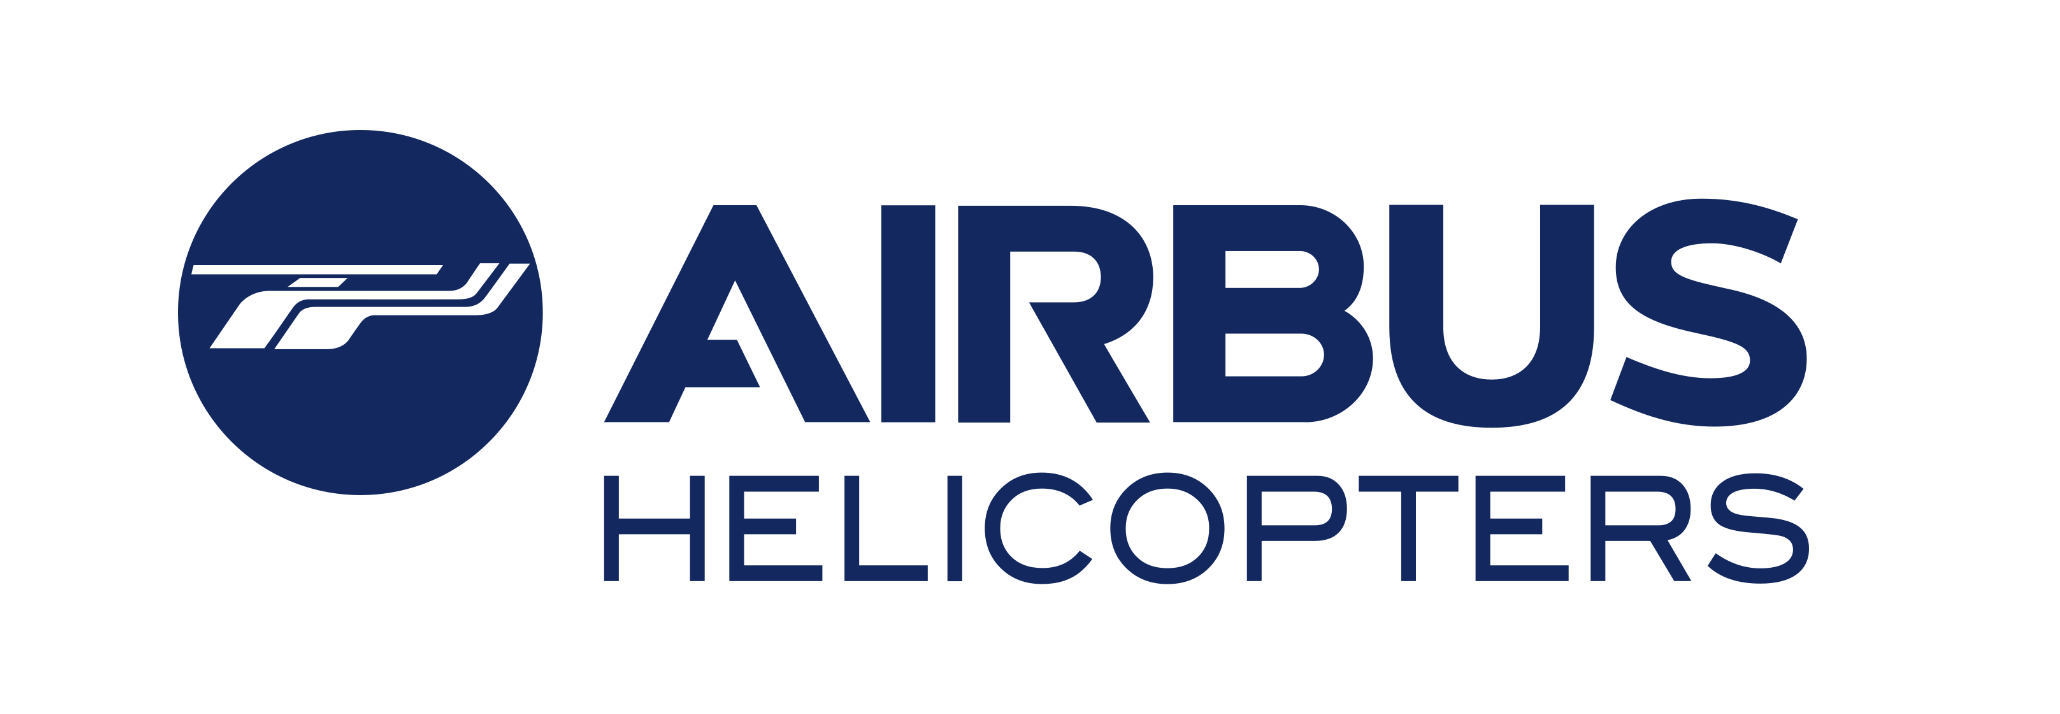 airbus-helicopters.png